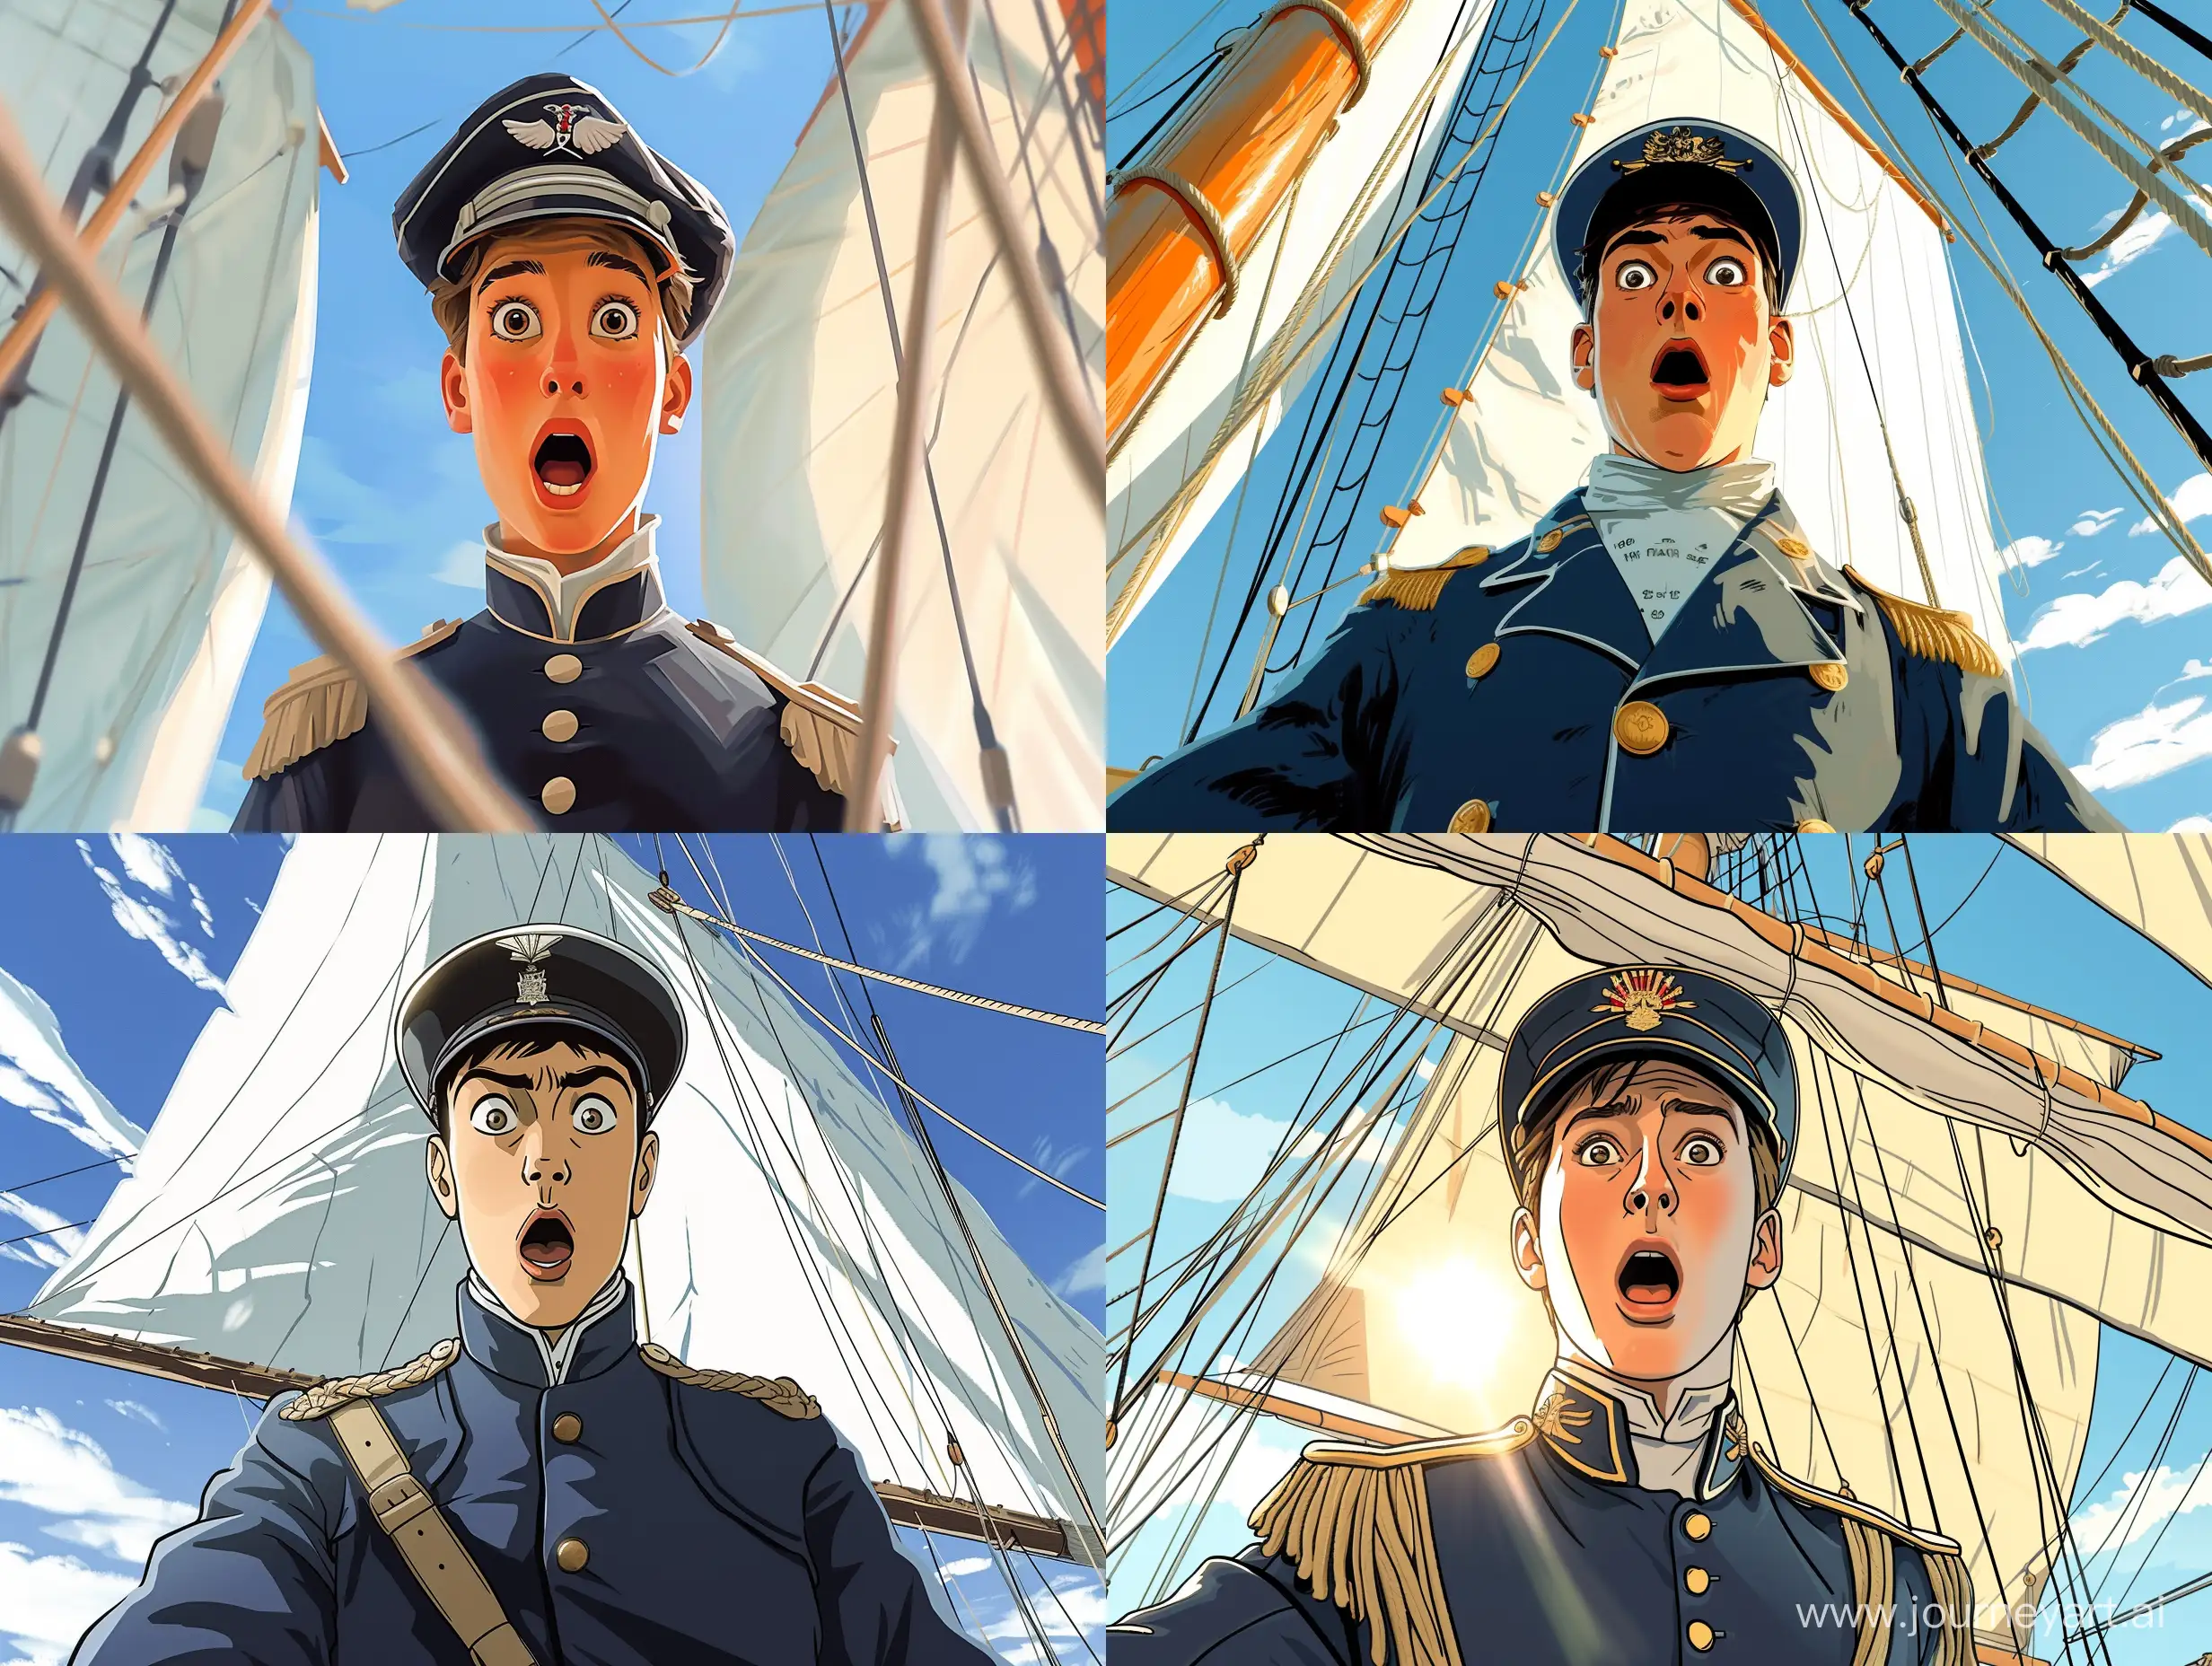 Cartoon in realistic style "Portrait of a 25-year-old captain in uniform standing on the deck of his sailing ship". The face expresses genuine surprise: eyebrows raised, eyes wide open, mouth slightly ajar. The bright lighting emphasises the snow-white sails against the blue sky. A young man wearing a cap with a captain's cockade. Correct horizon